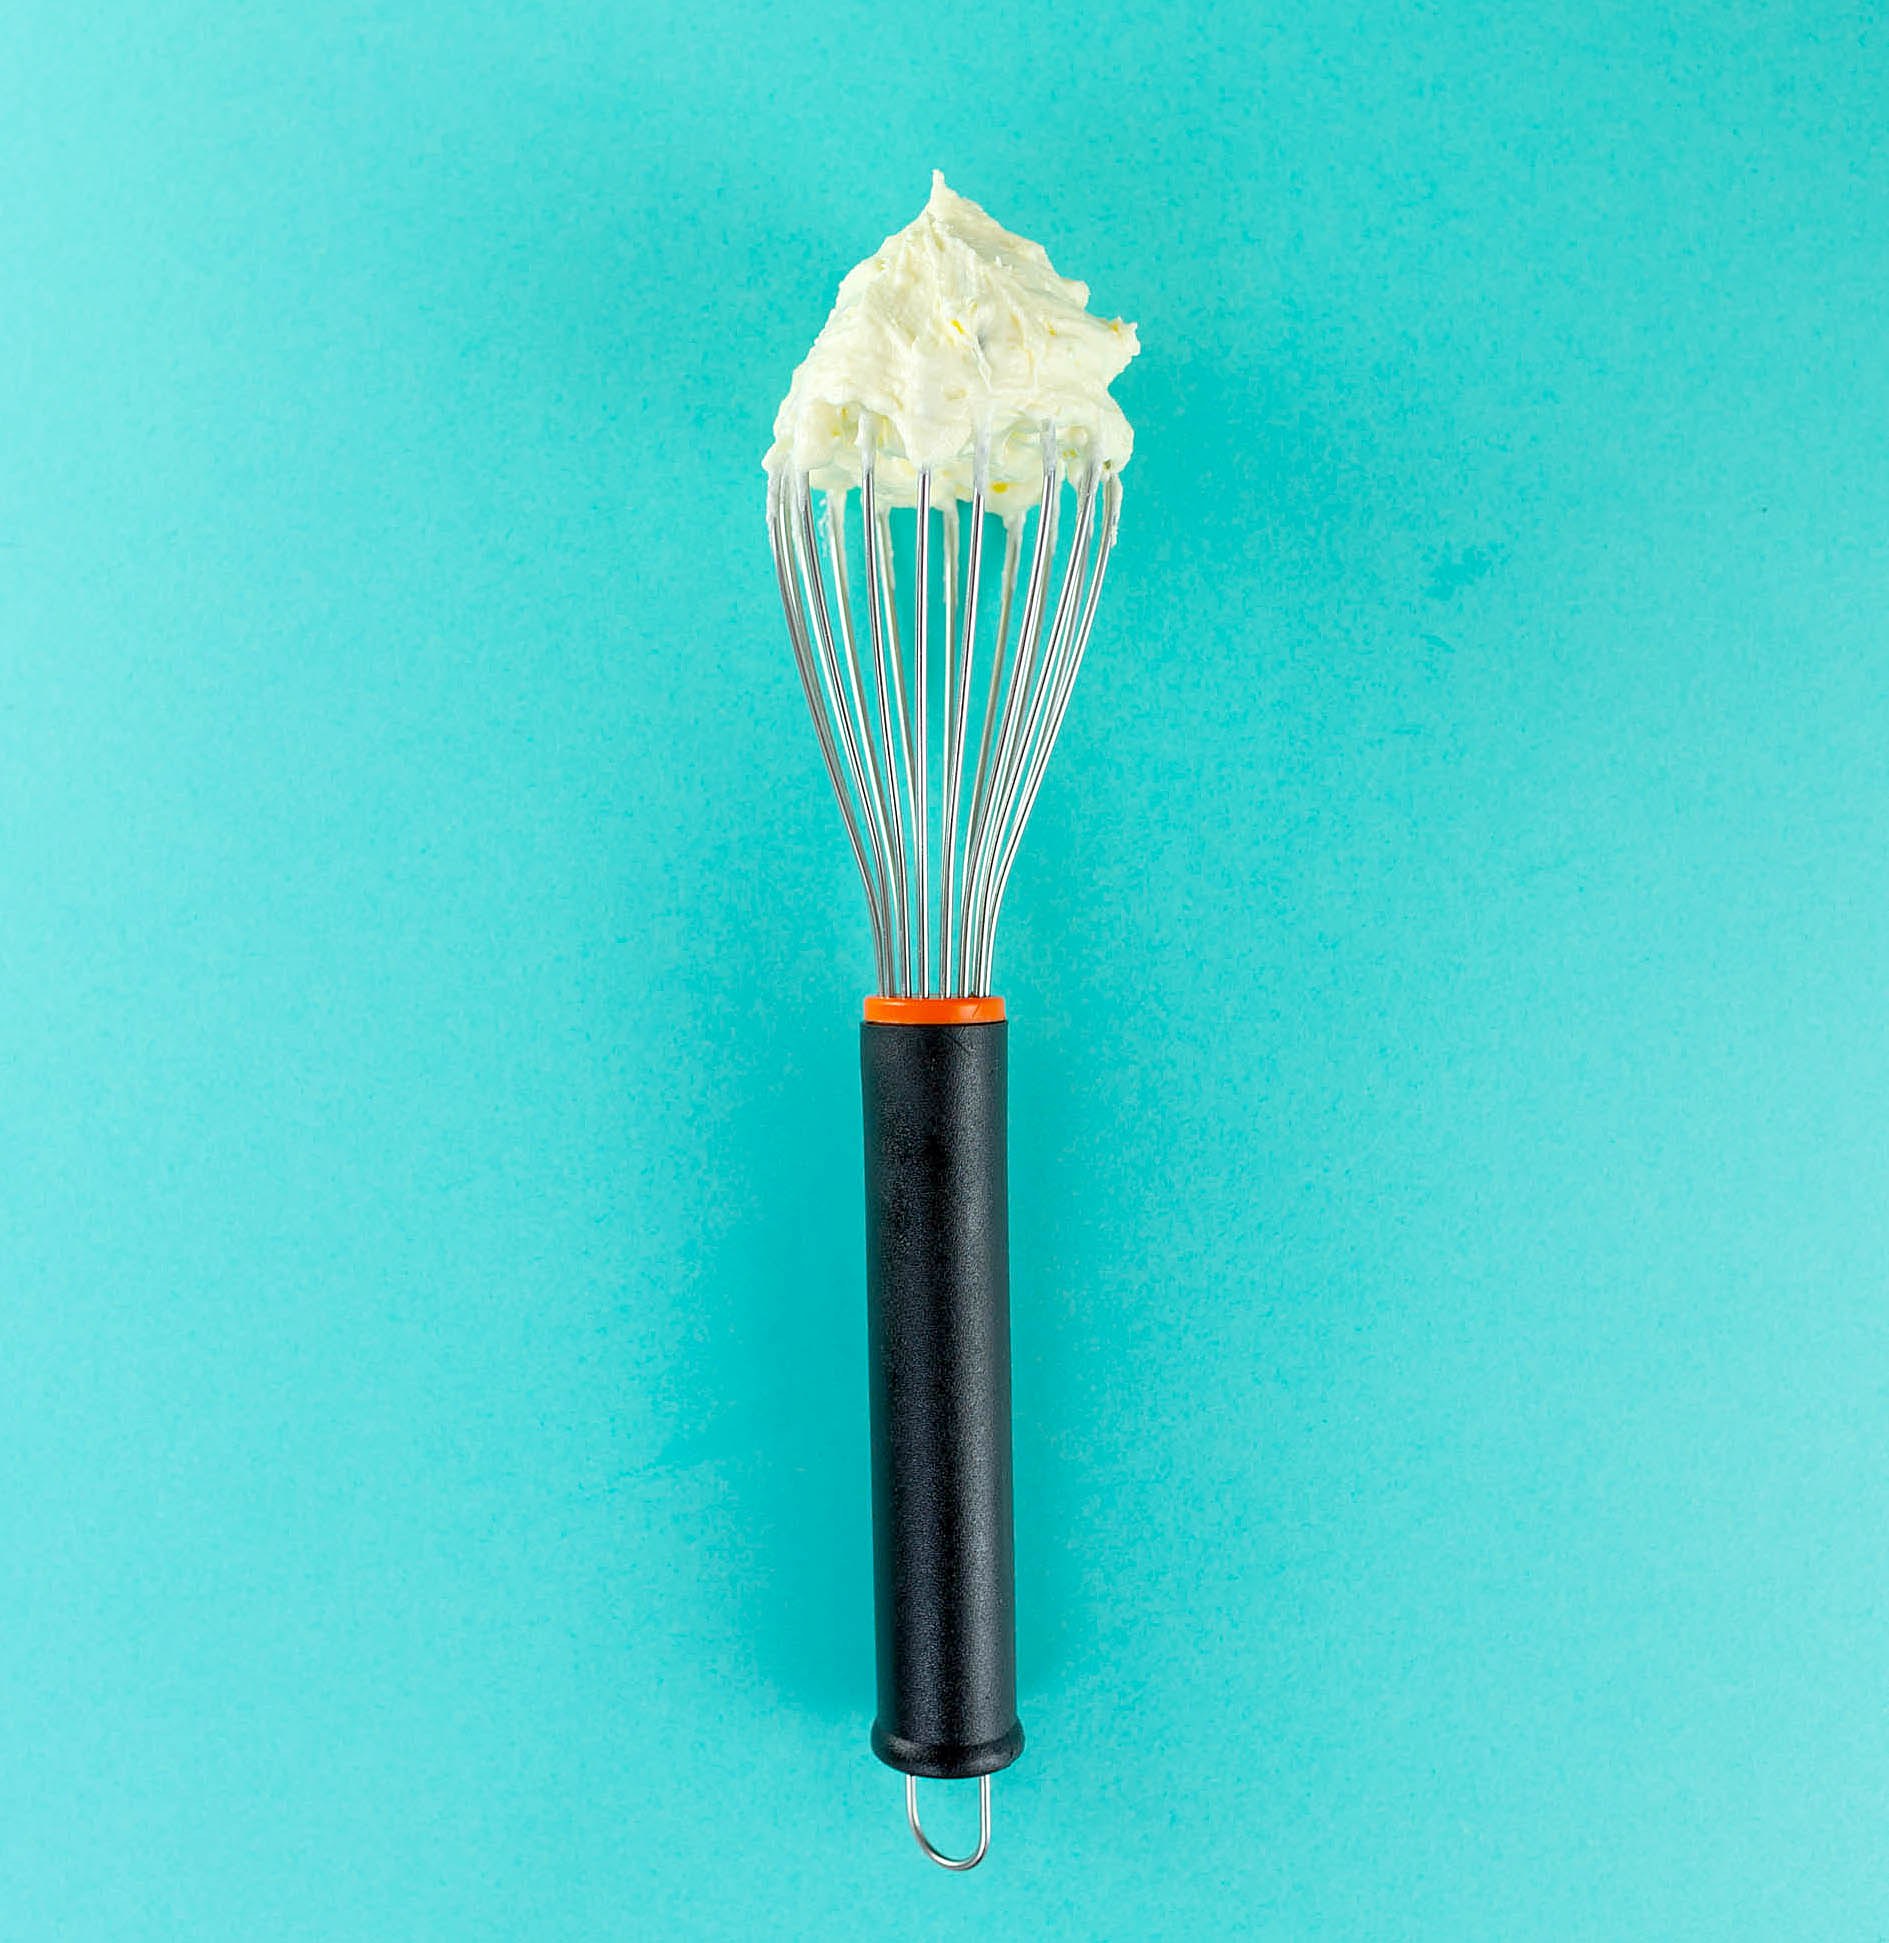 What do you need for baking? A hand whisk